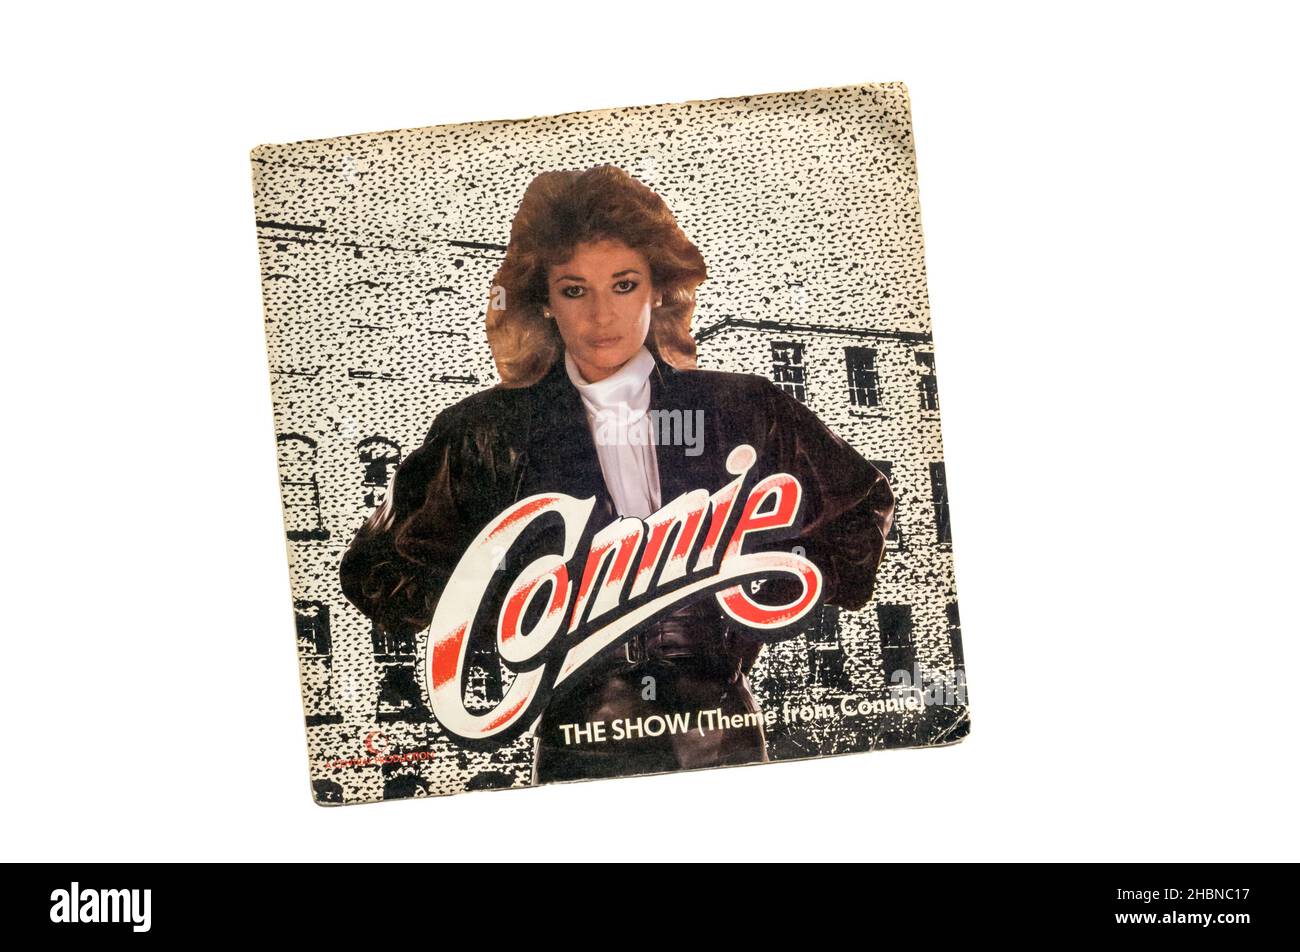 1985 7' single of The Show by Rebecca Storm, the theme from the TV show Connie. Stock Photo